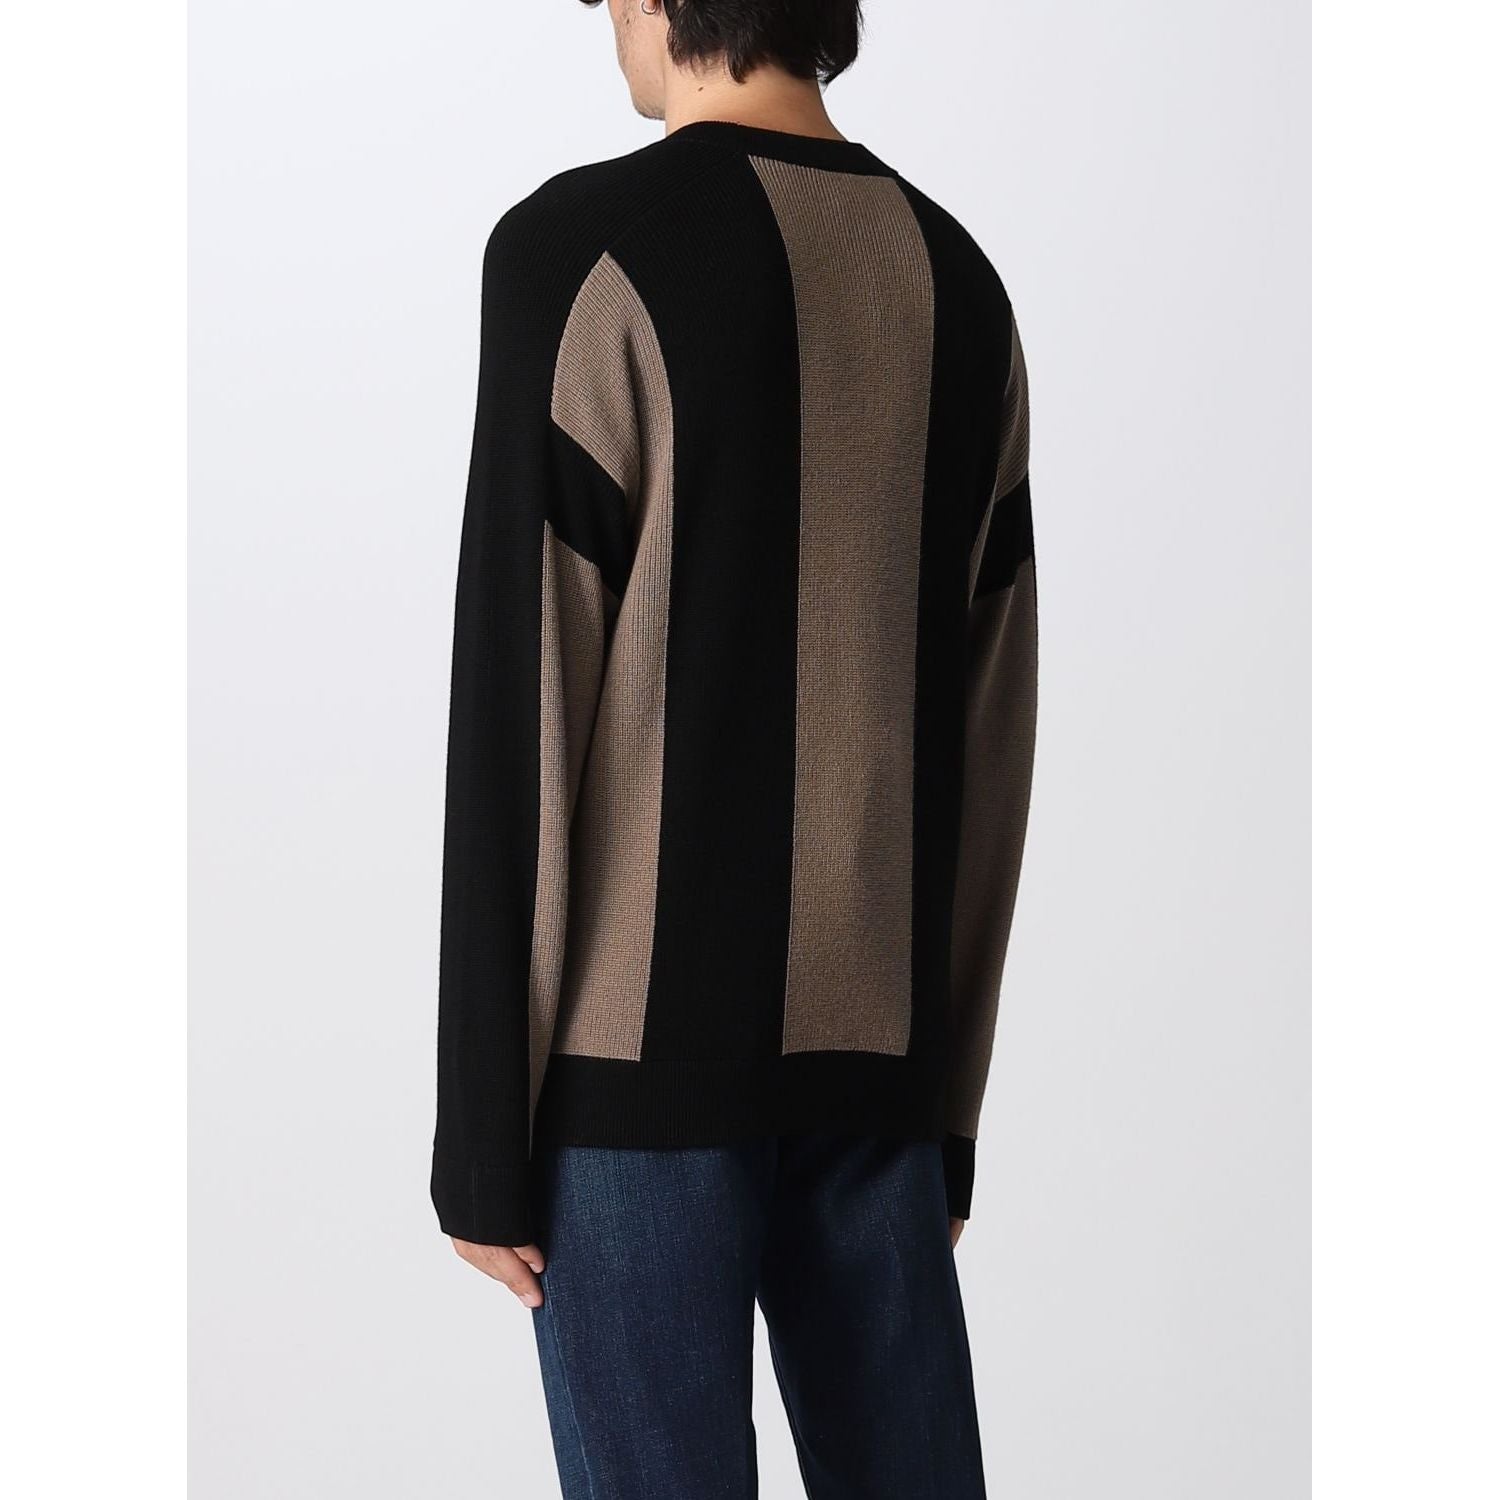 EMPORIO ARMANI VIRGIN WOOL BLEND JUMPER IN CORN-ON-THE-COB STITCH WITH INLAY - Yooto